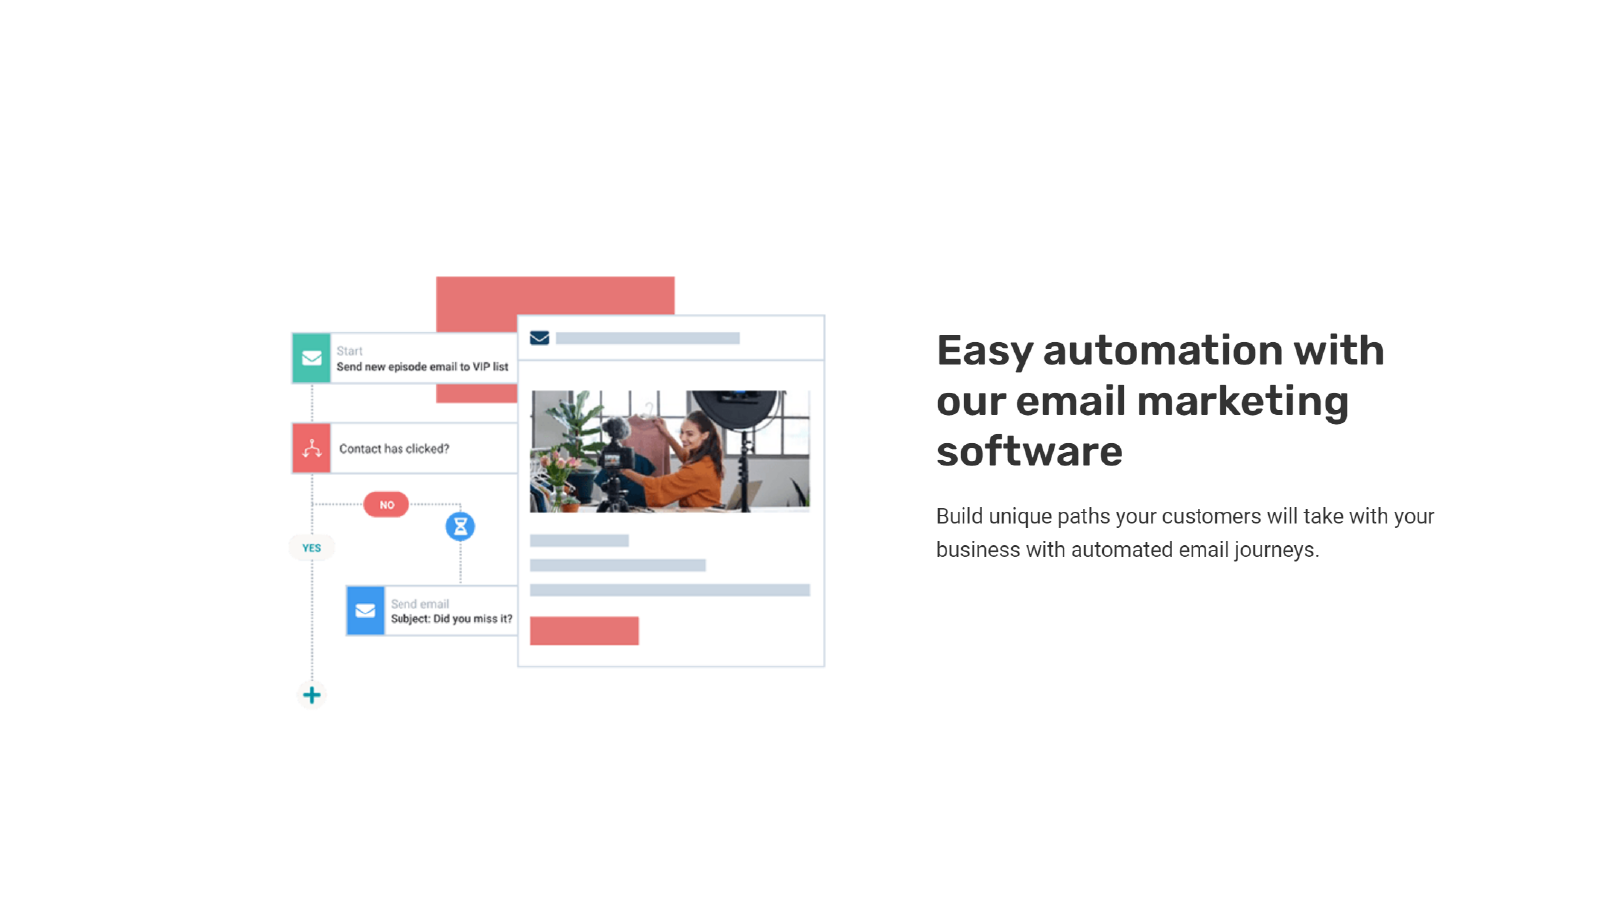 Easy automation with our email marketing software